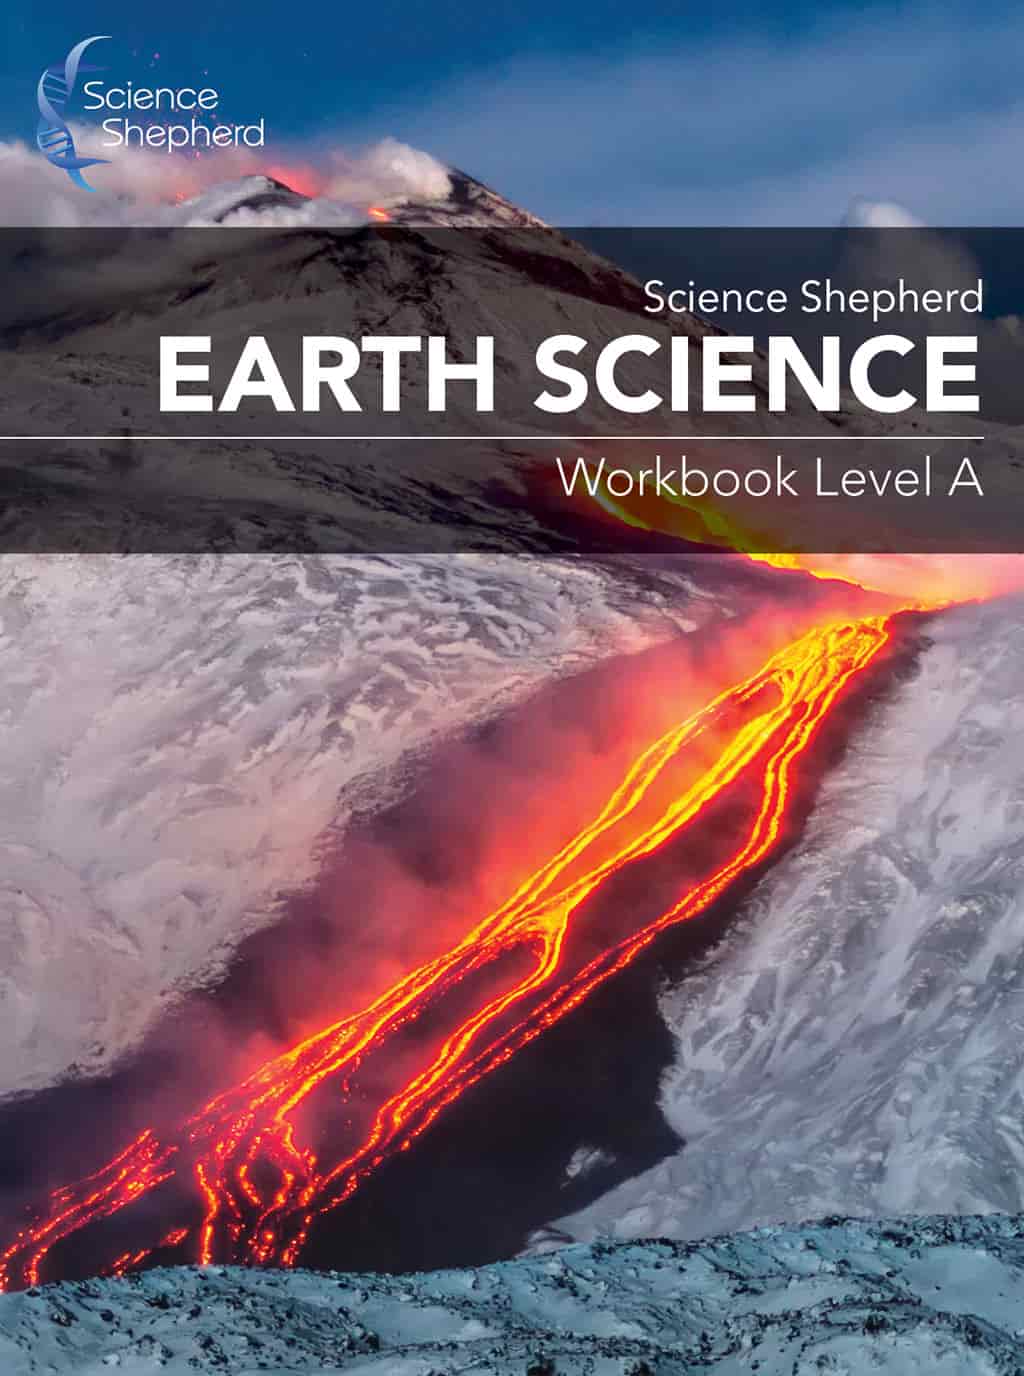 Earth Science homeschool curriculum workbook level A cover of a volcano erupting